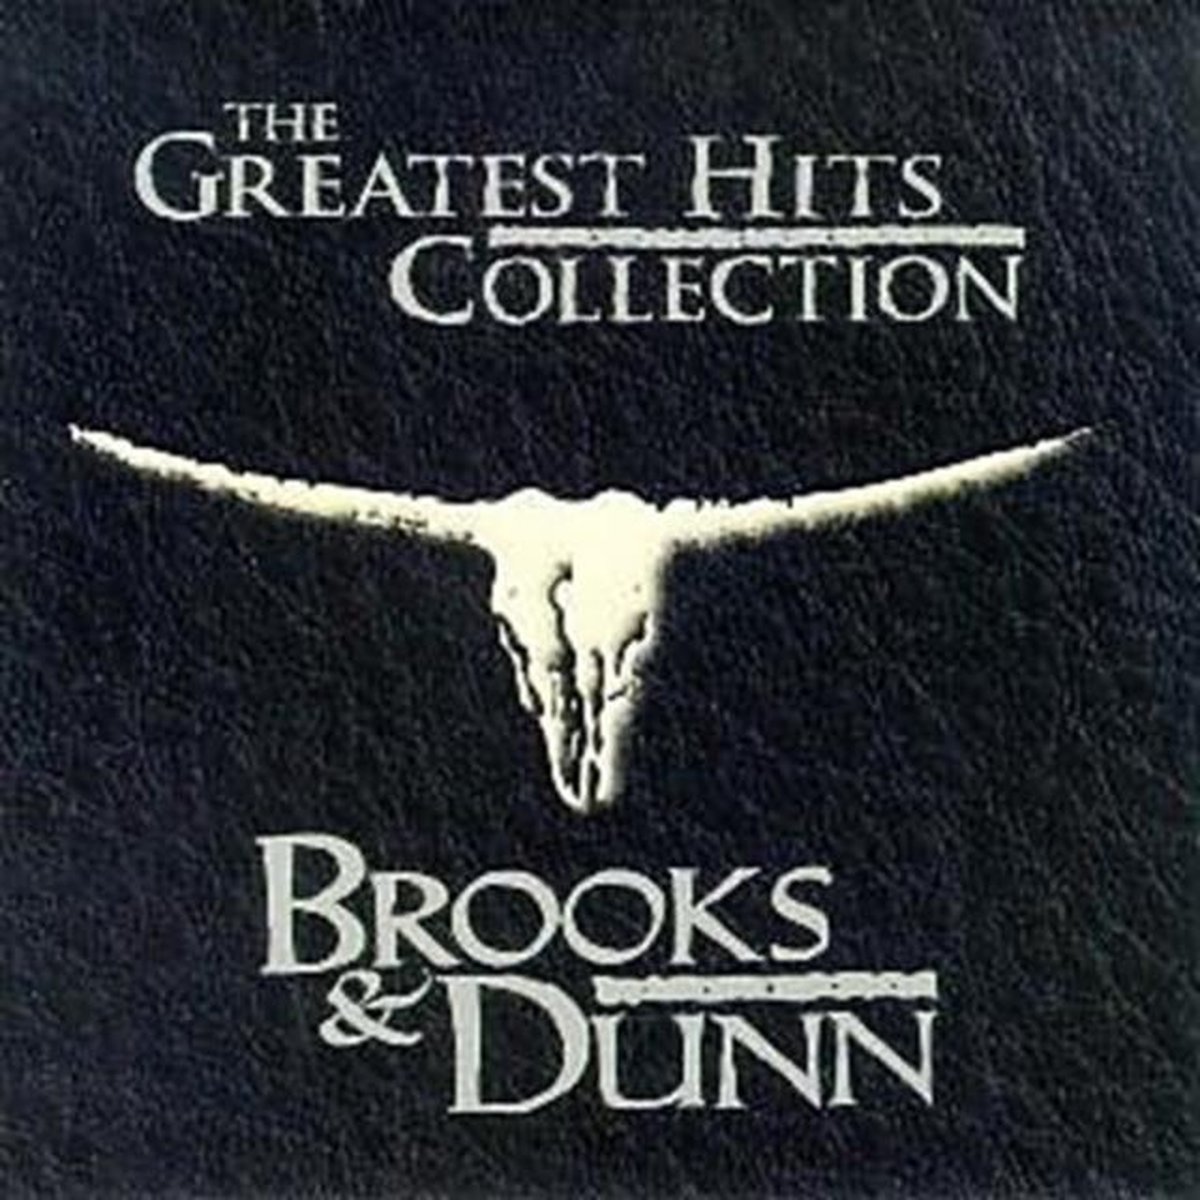 Greatest Hits Collection - Brooks & Dunn